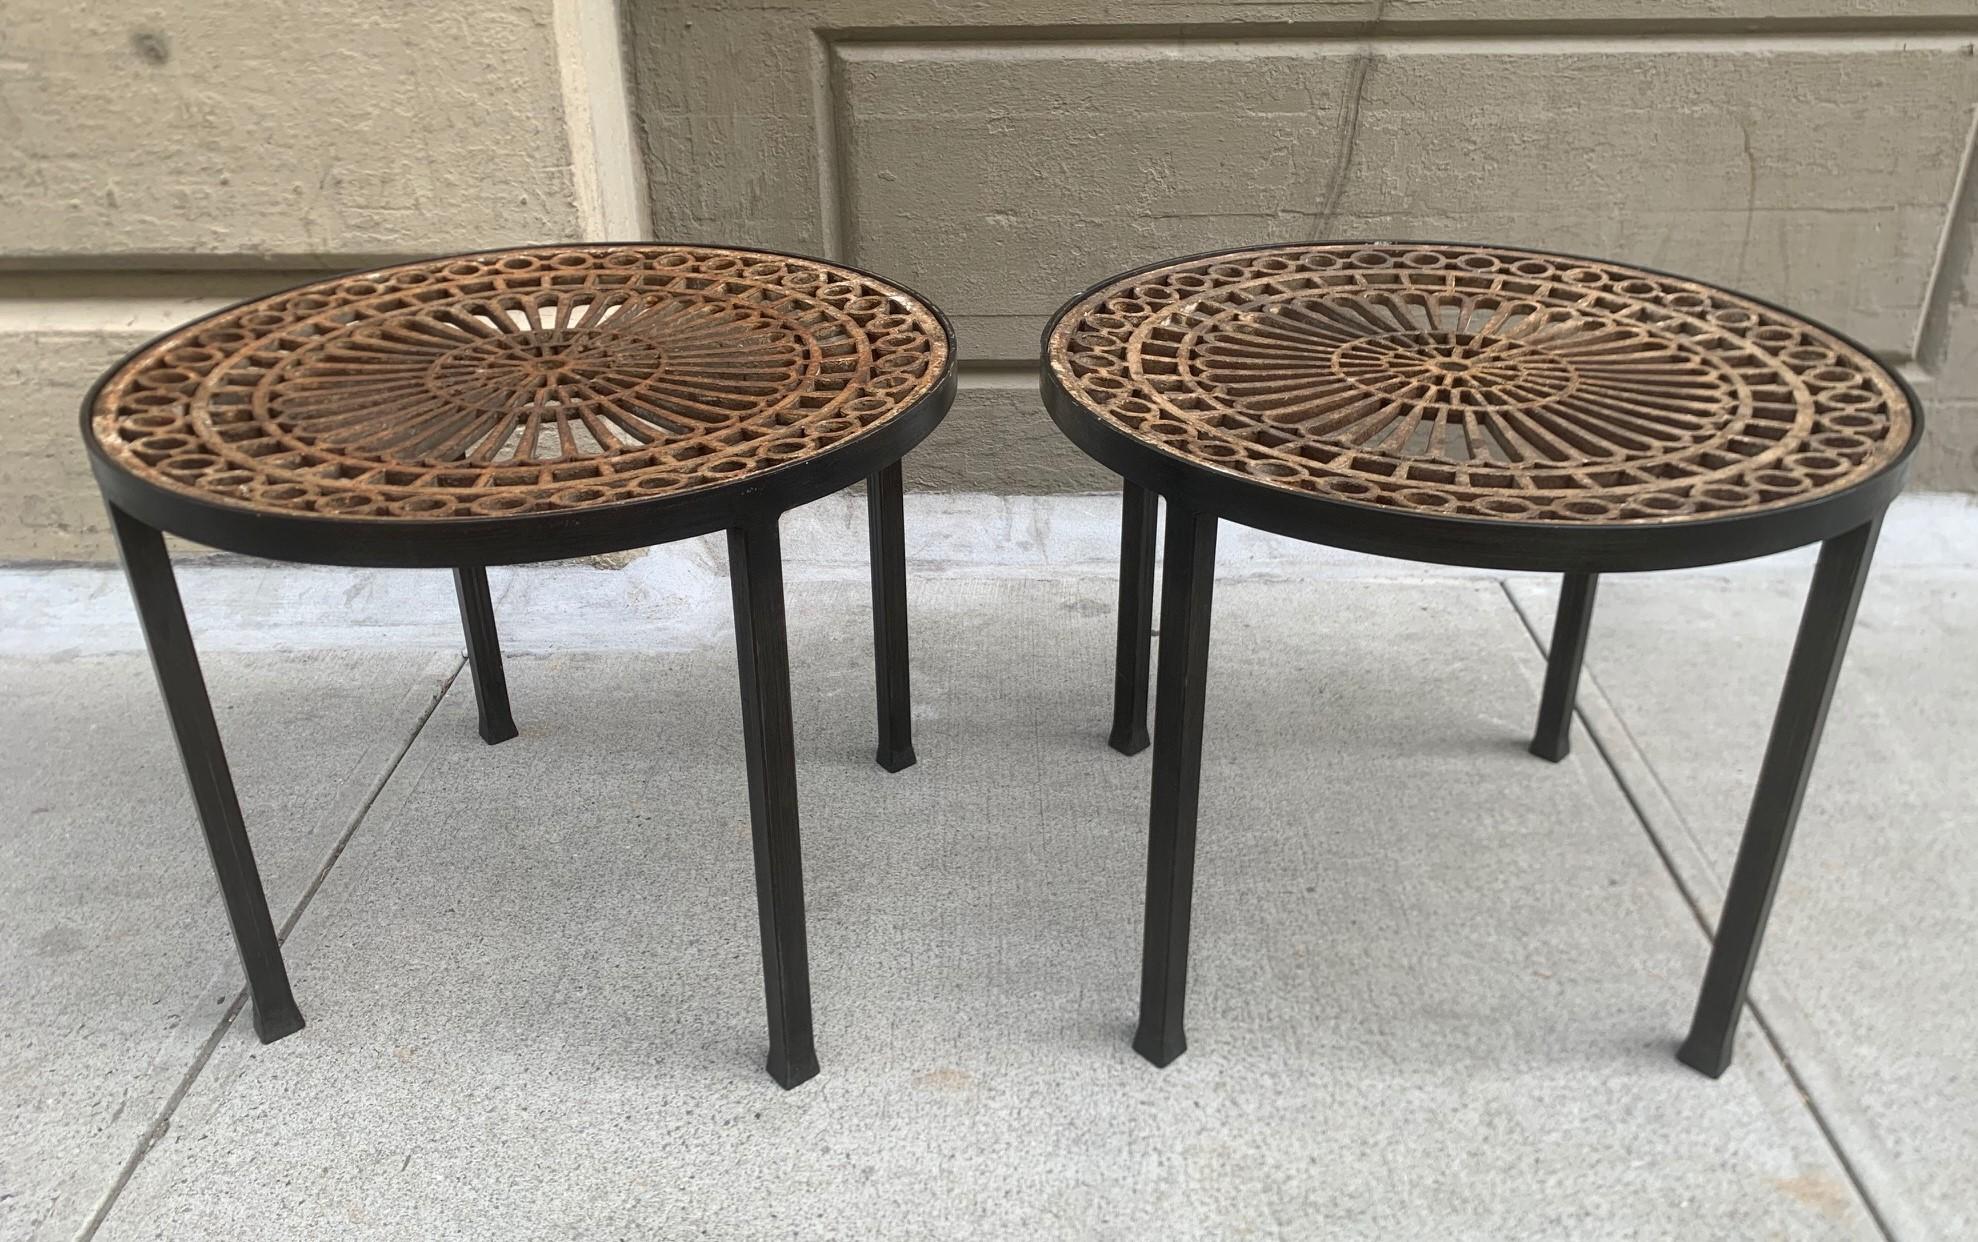 Pair of vintage Victorian tables with cast iron tops. The tables have an antique grill insert set on newer iron bases.